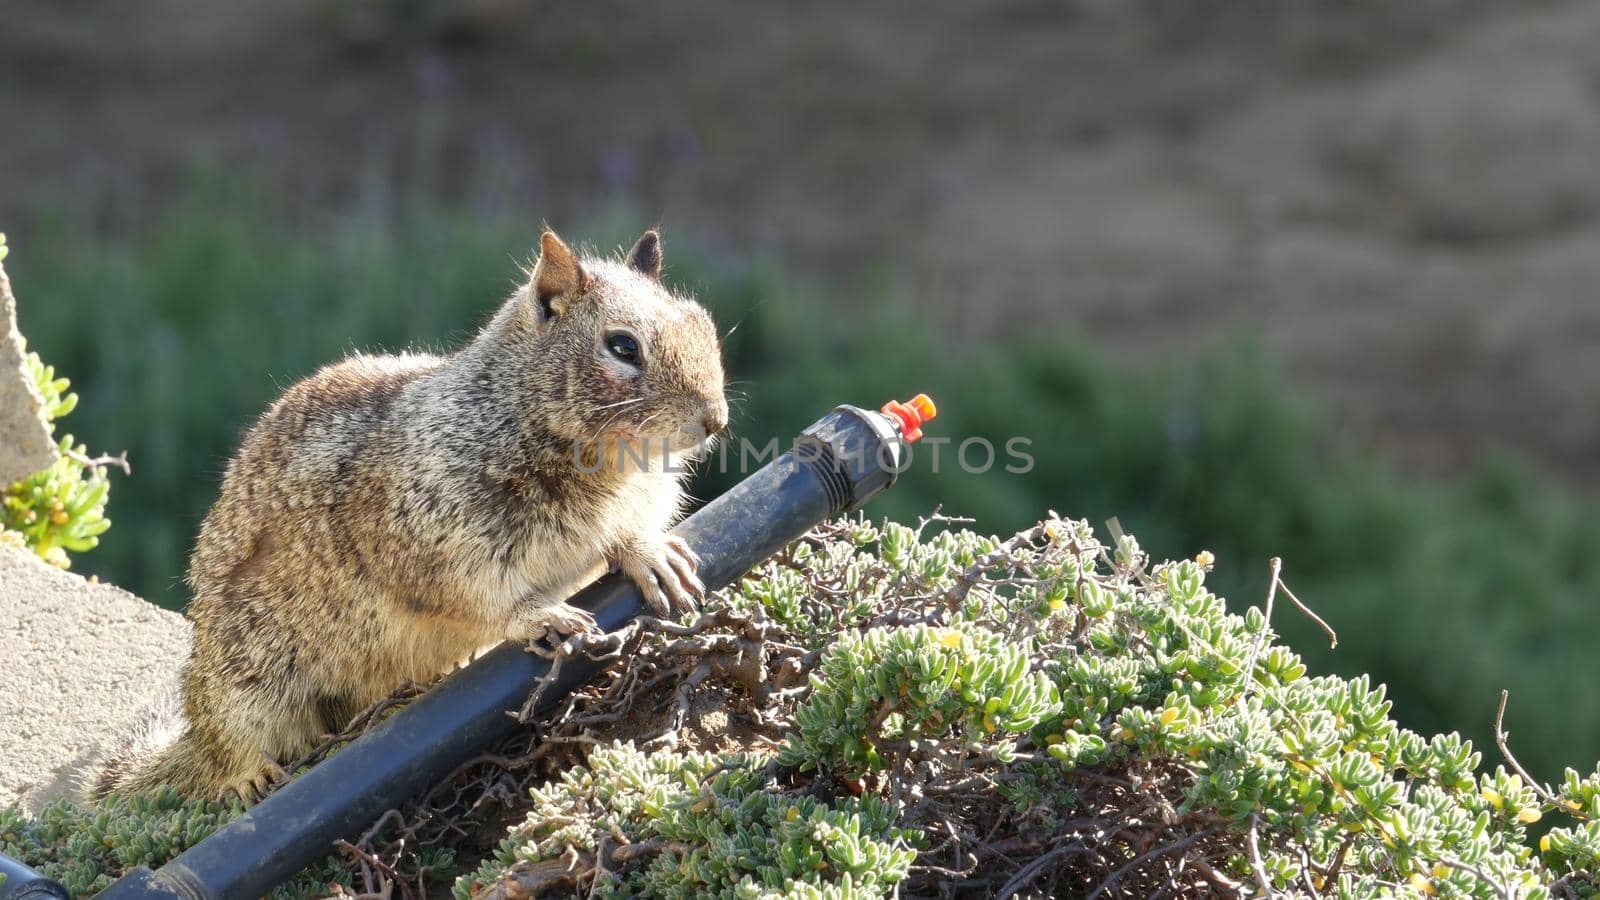 Beechey ground squirrel, common in California, Pacific coast, USA. Funny behavior of cute gray wild rodent. Small amusing animal in natural habitat. Pretty little endemic looking for food in America.